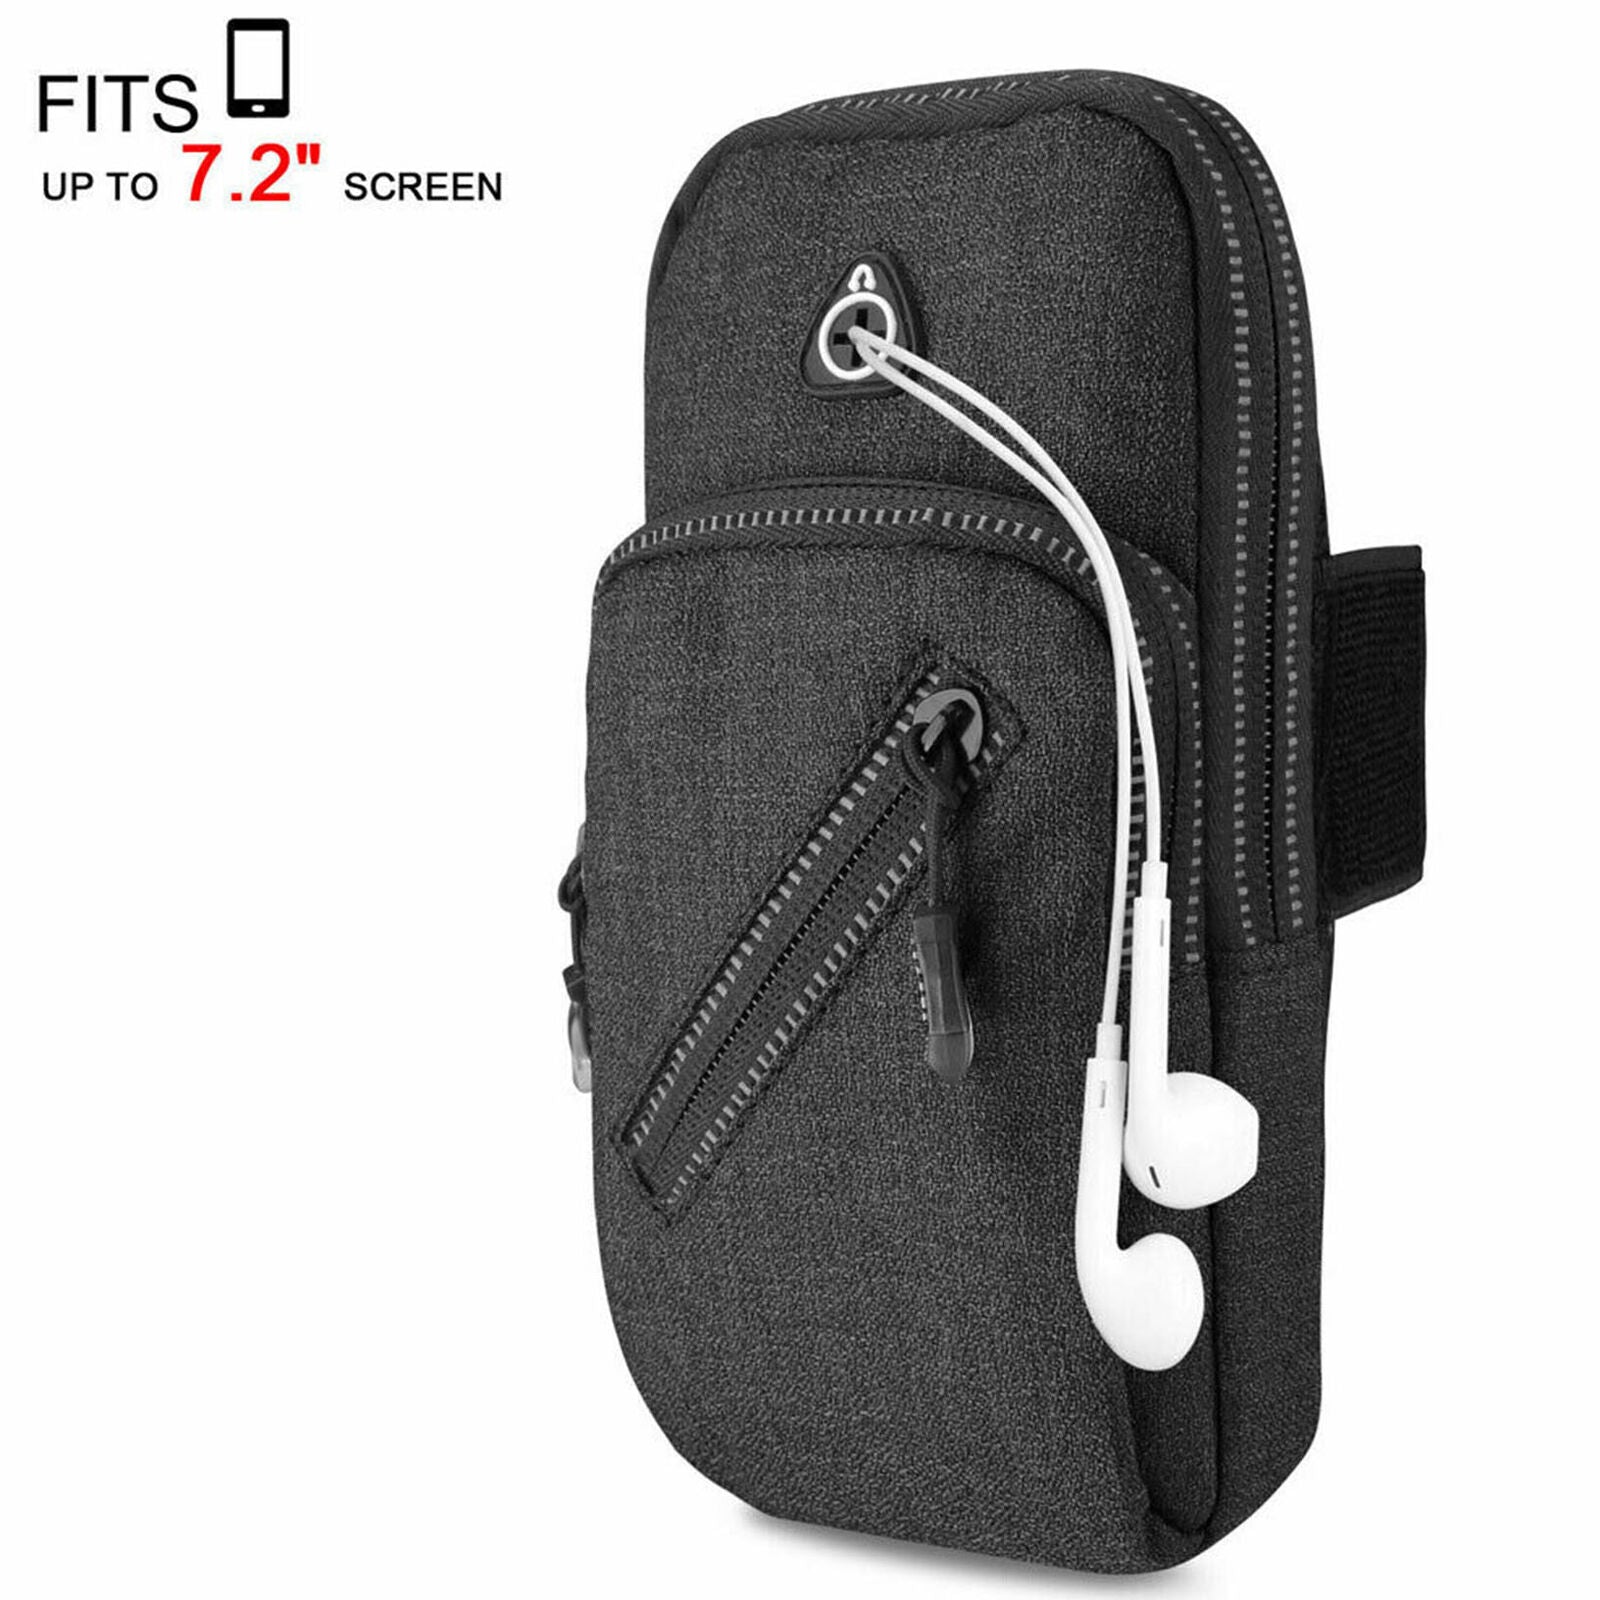 Armband Phone Holder Case Sports Gym  Arm Band Bag For Cellphone new